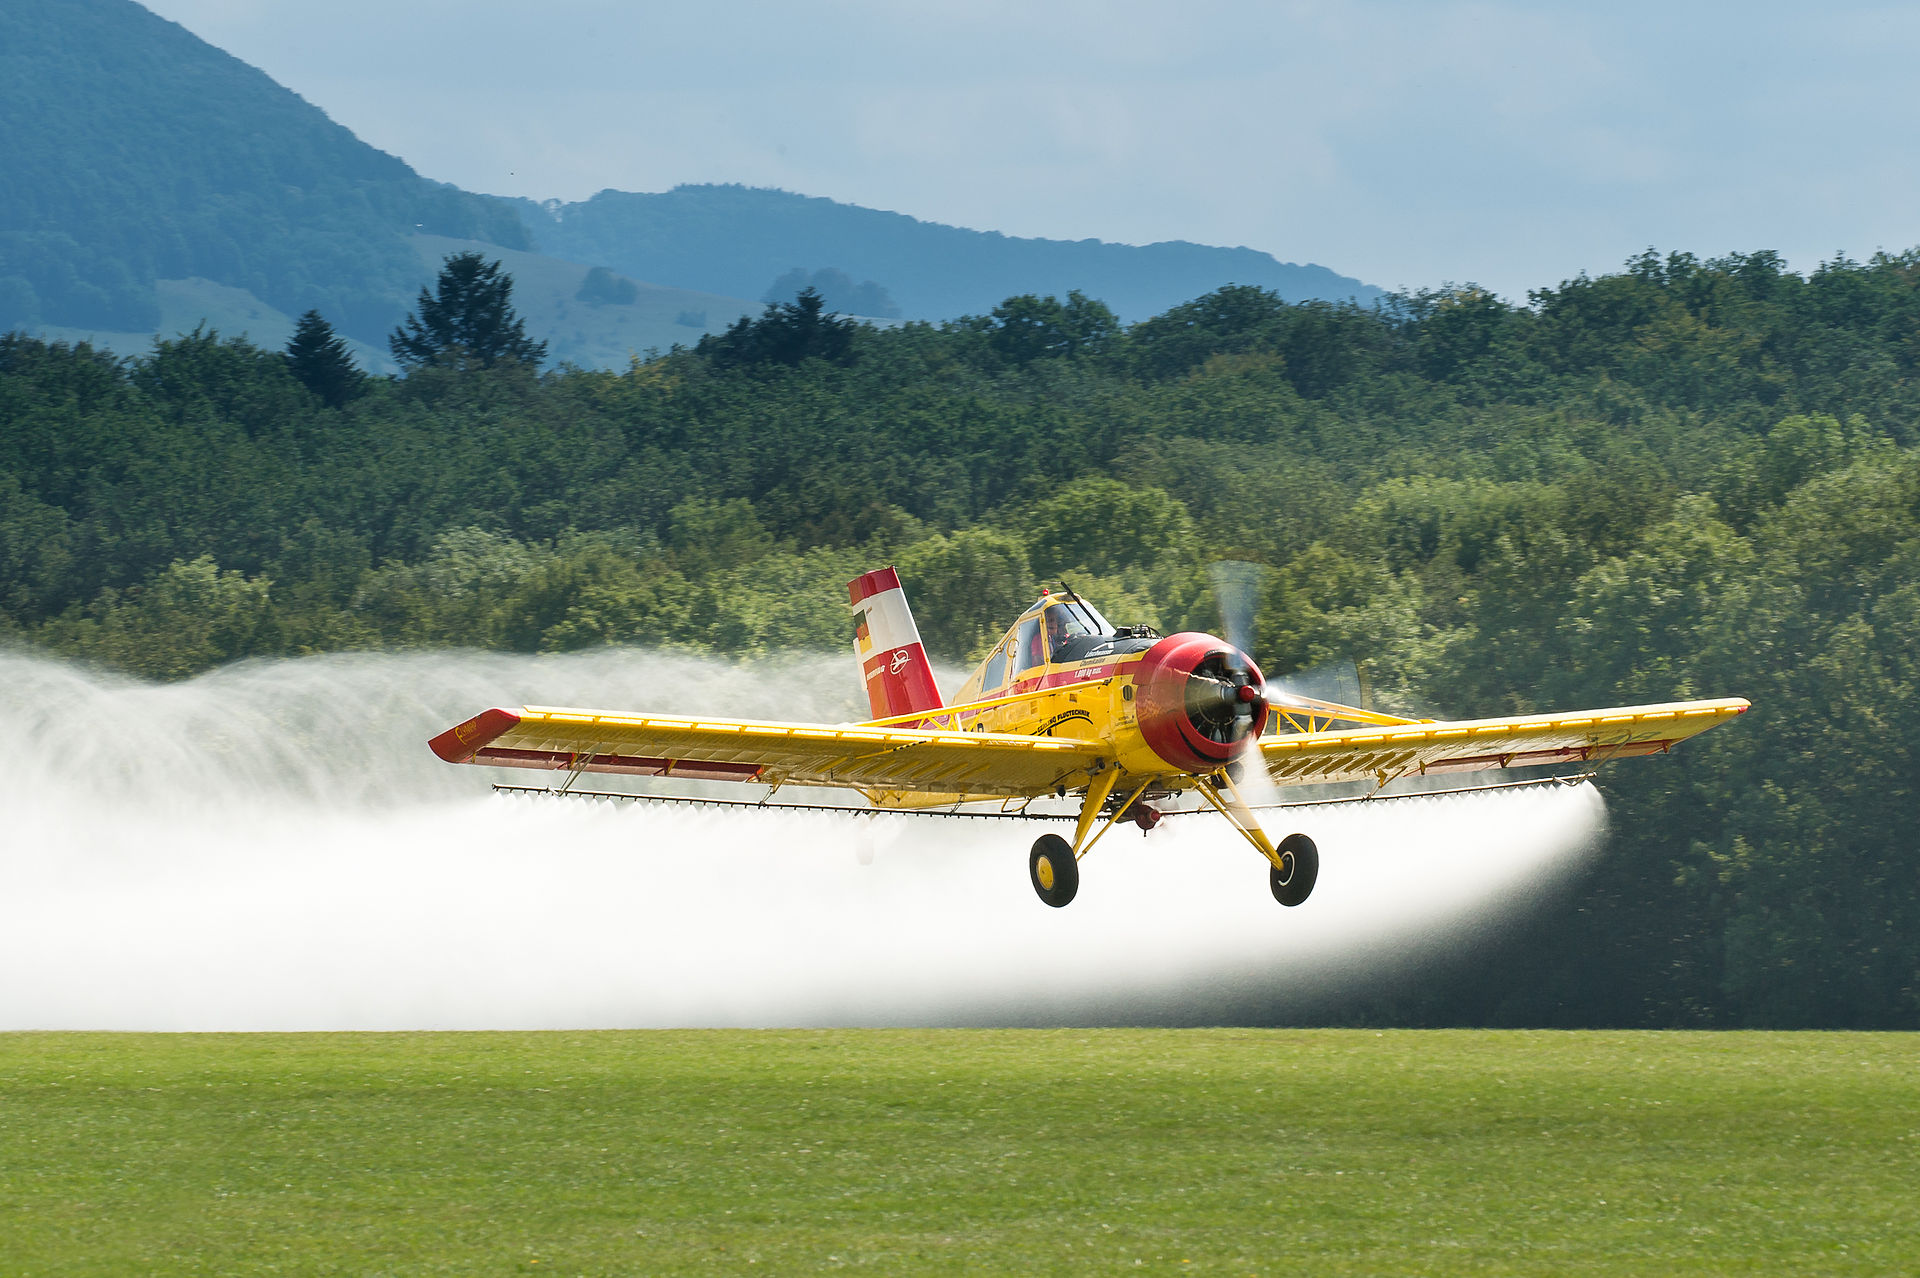 crop duster spraying insecticide on field